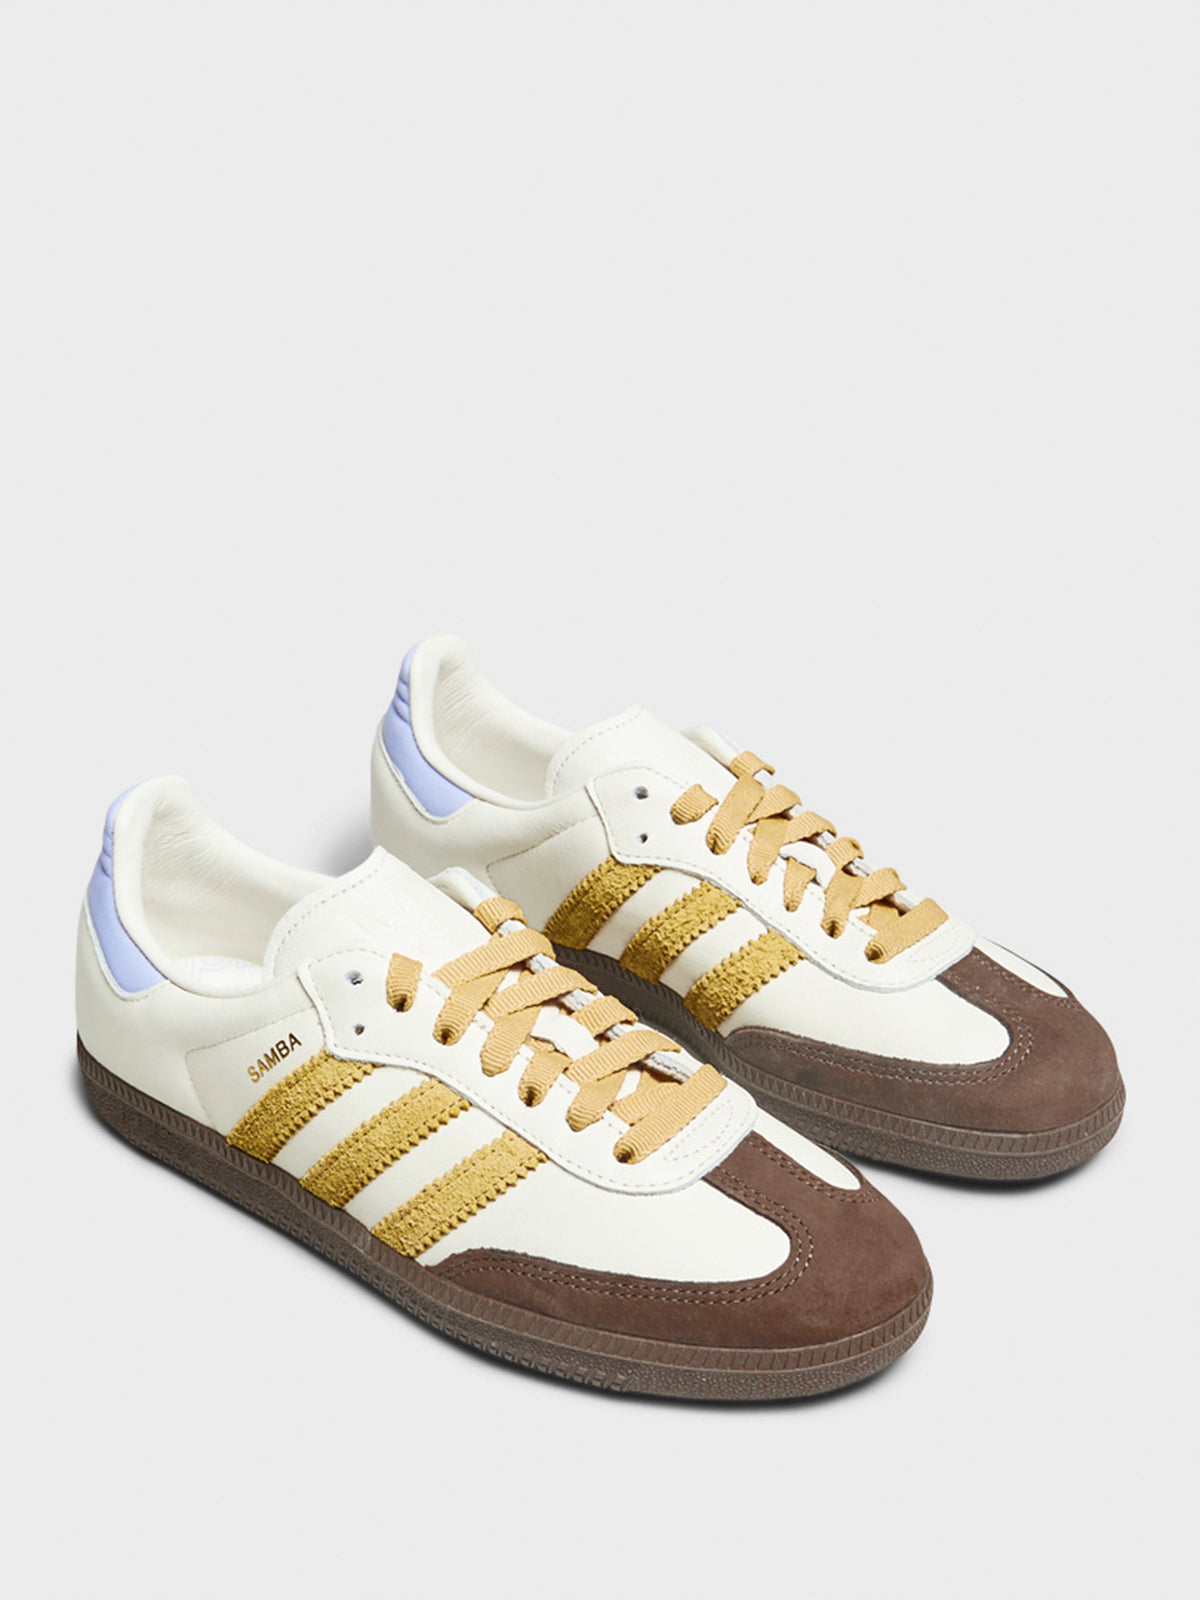 Women's Samba Indoor Sneakers in Off White, Oat and Violet Tone